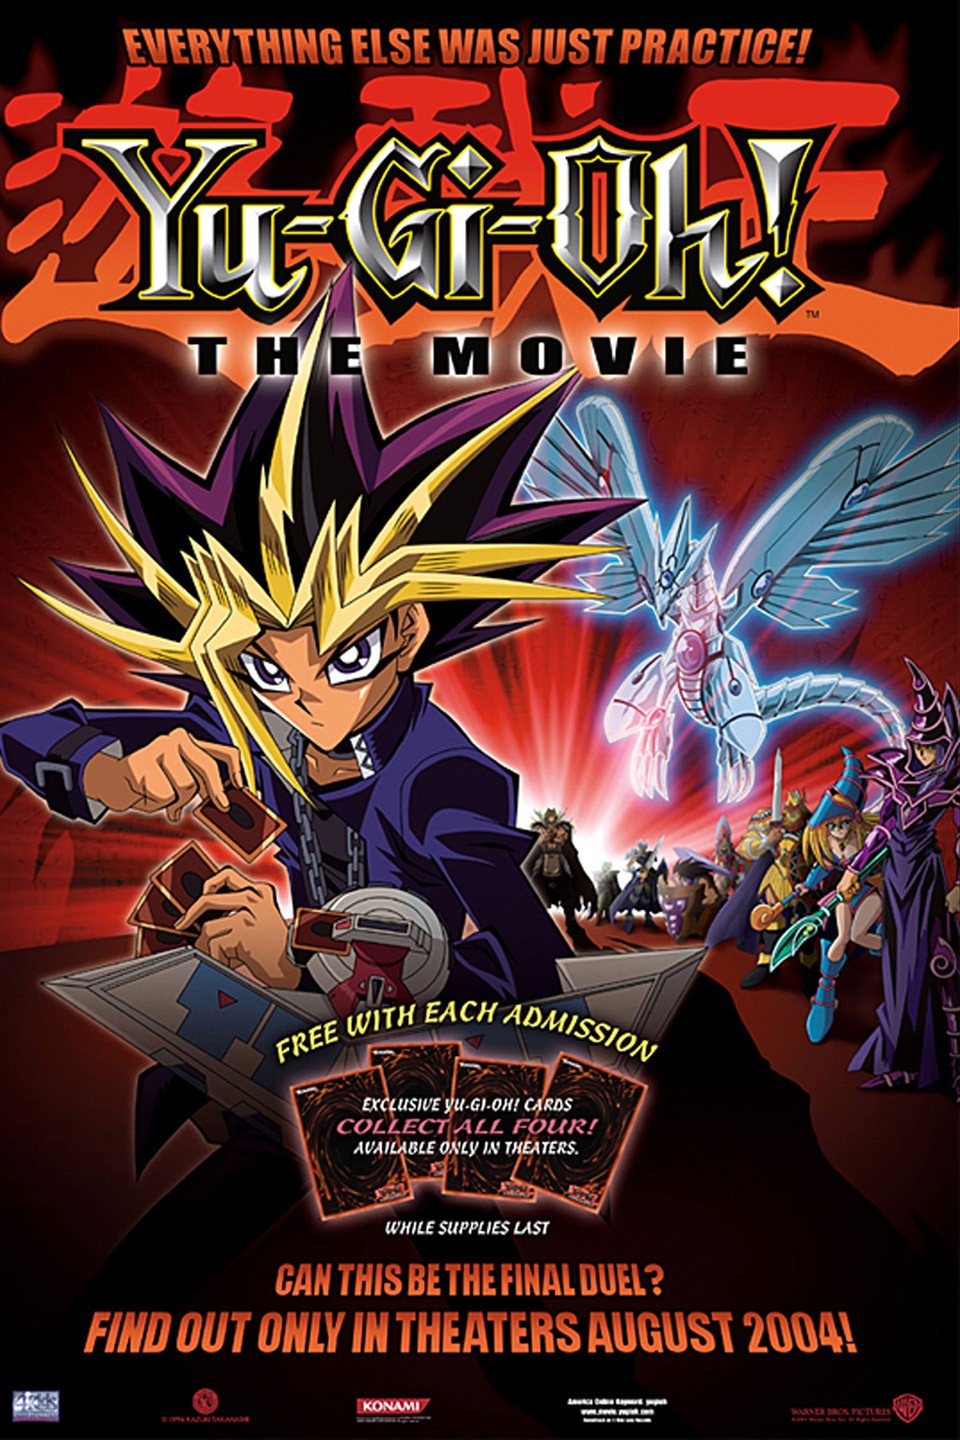 Watch full length Yu-Gi-Oh! episodes online.